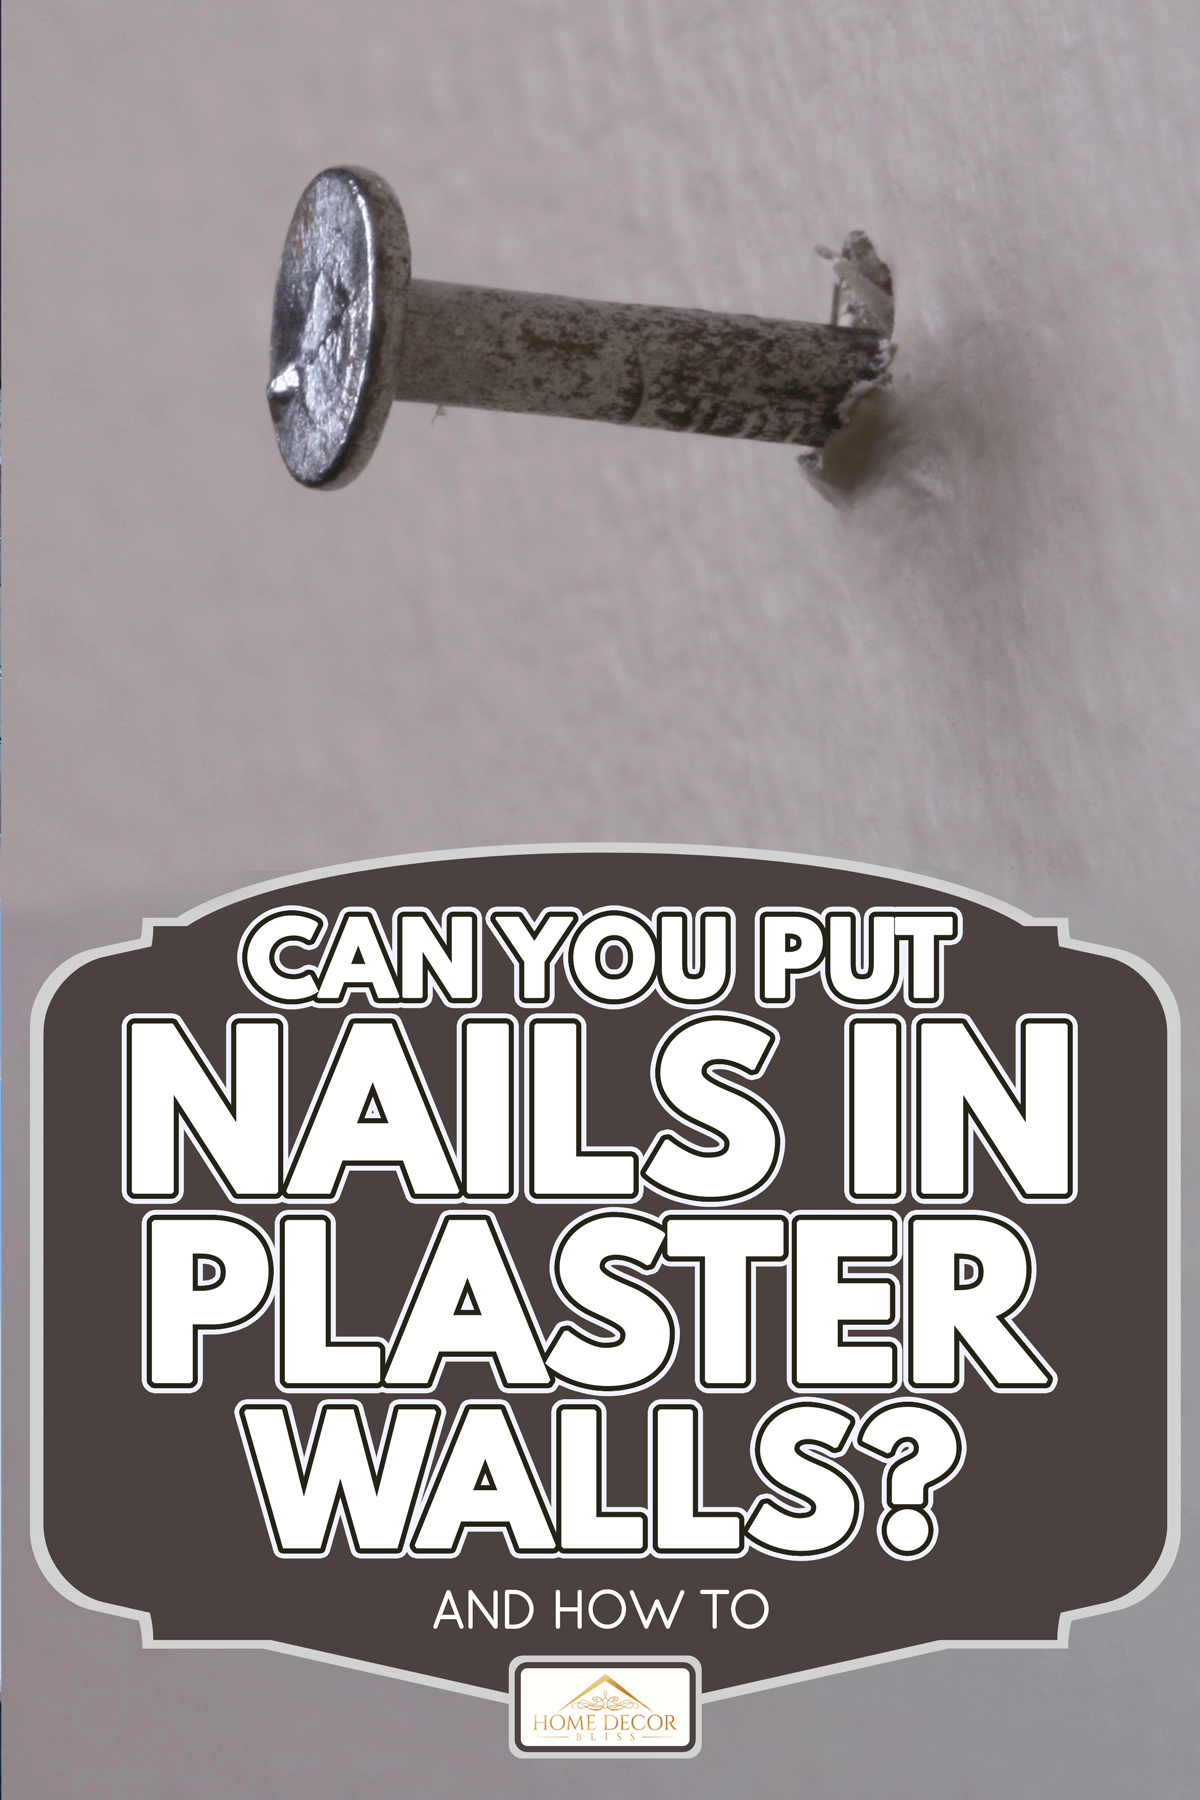 Nail in the wall, Can You Put Nails In Plaster Walls? [And How To]